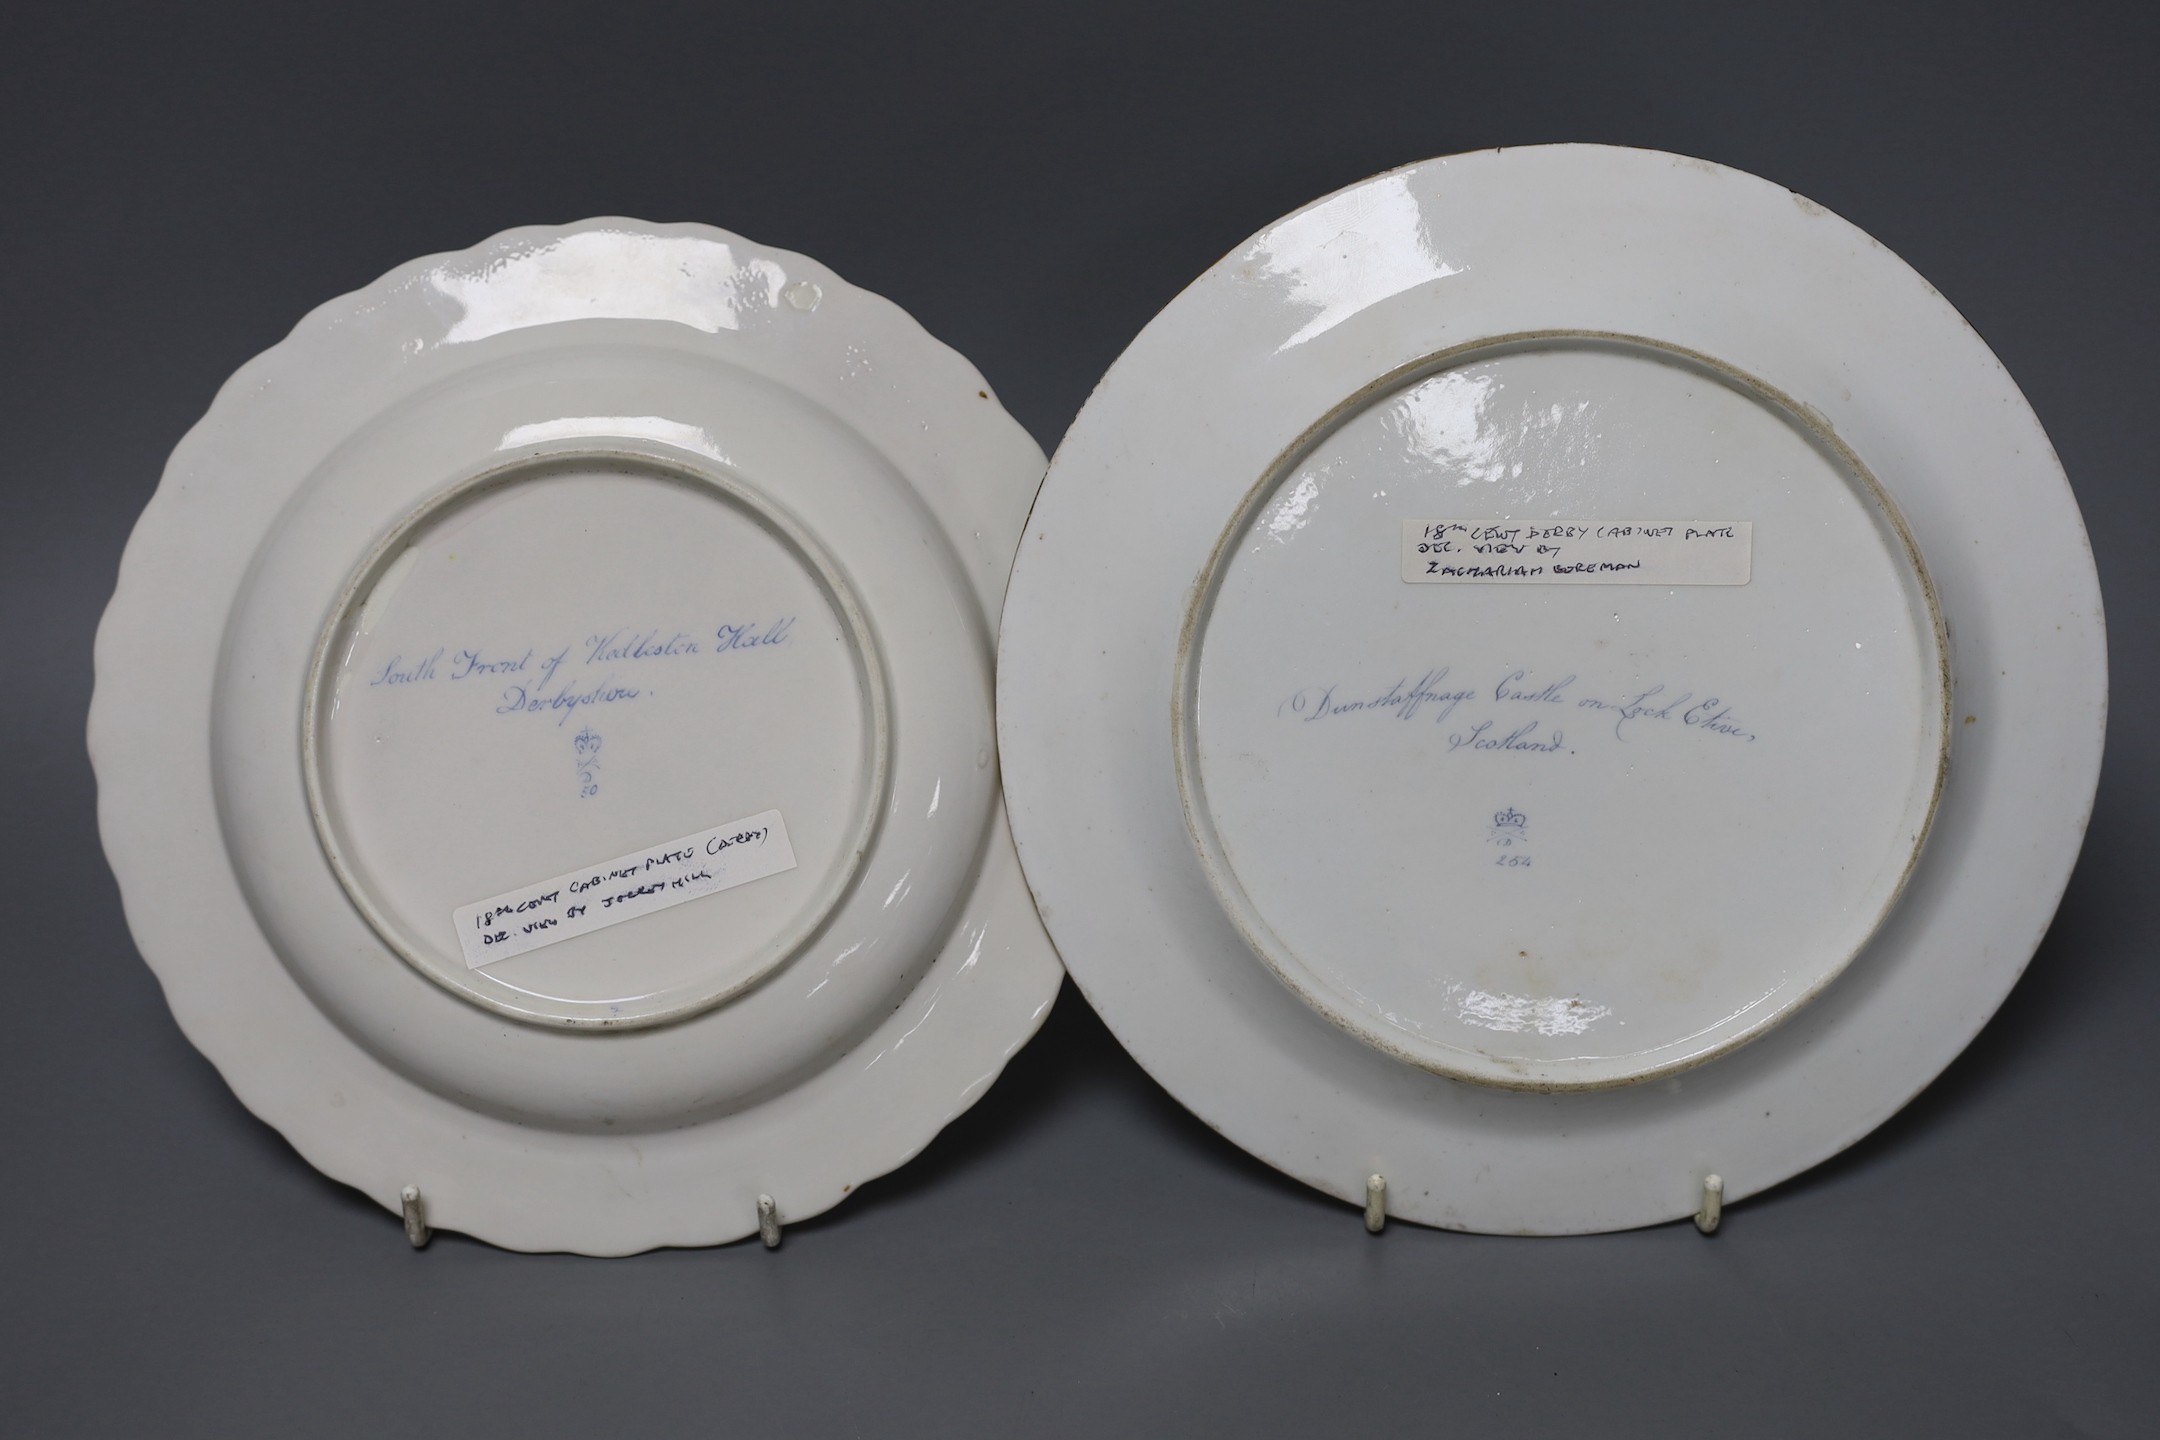 Two Derby dessert plates, late 18th century, attributed to Zachariah Boreman and ‘Jockey’ Hill, - Image 4 of 4